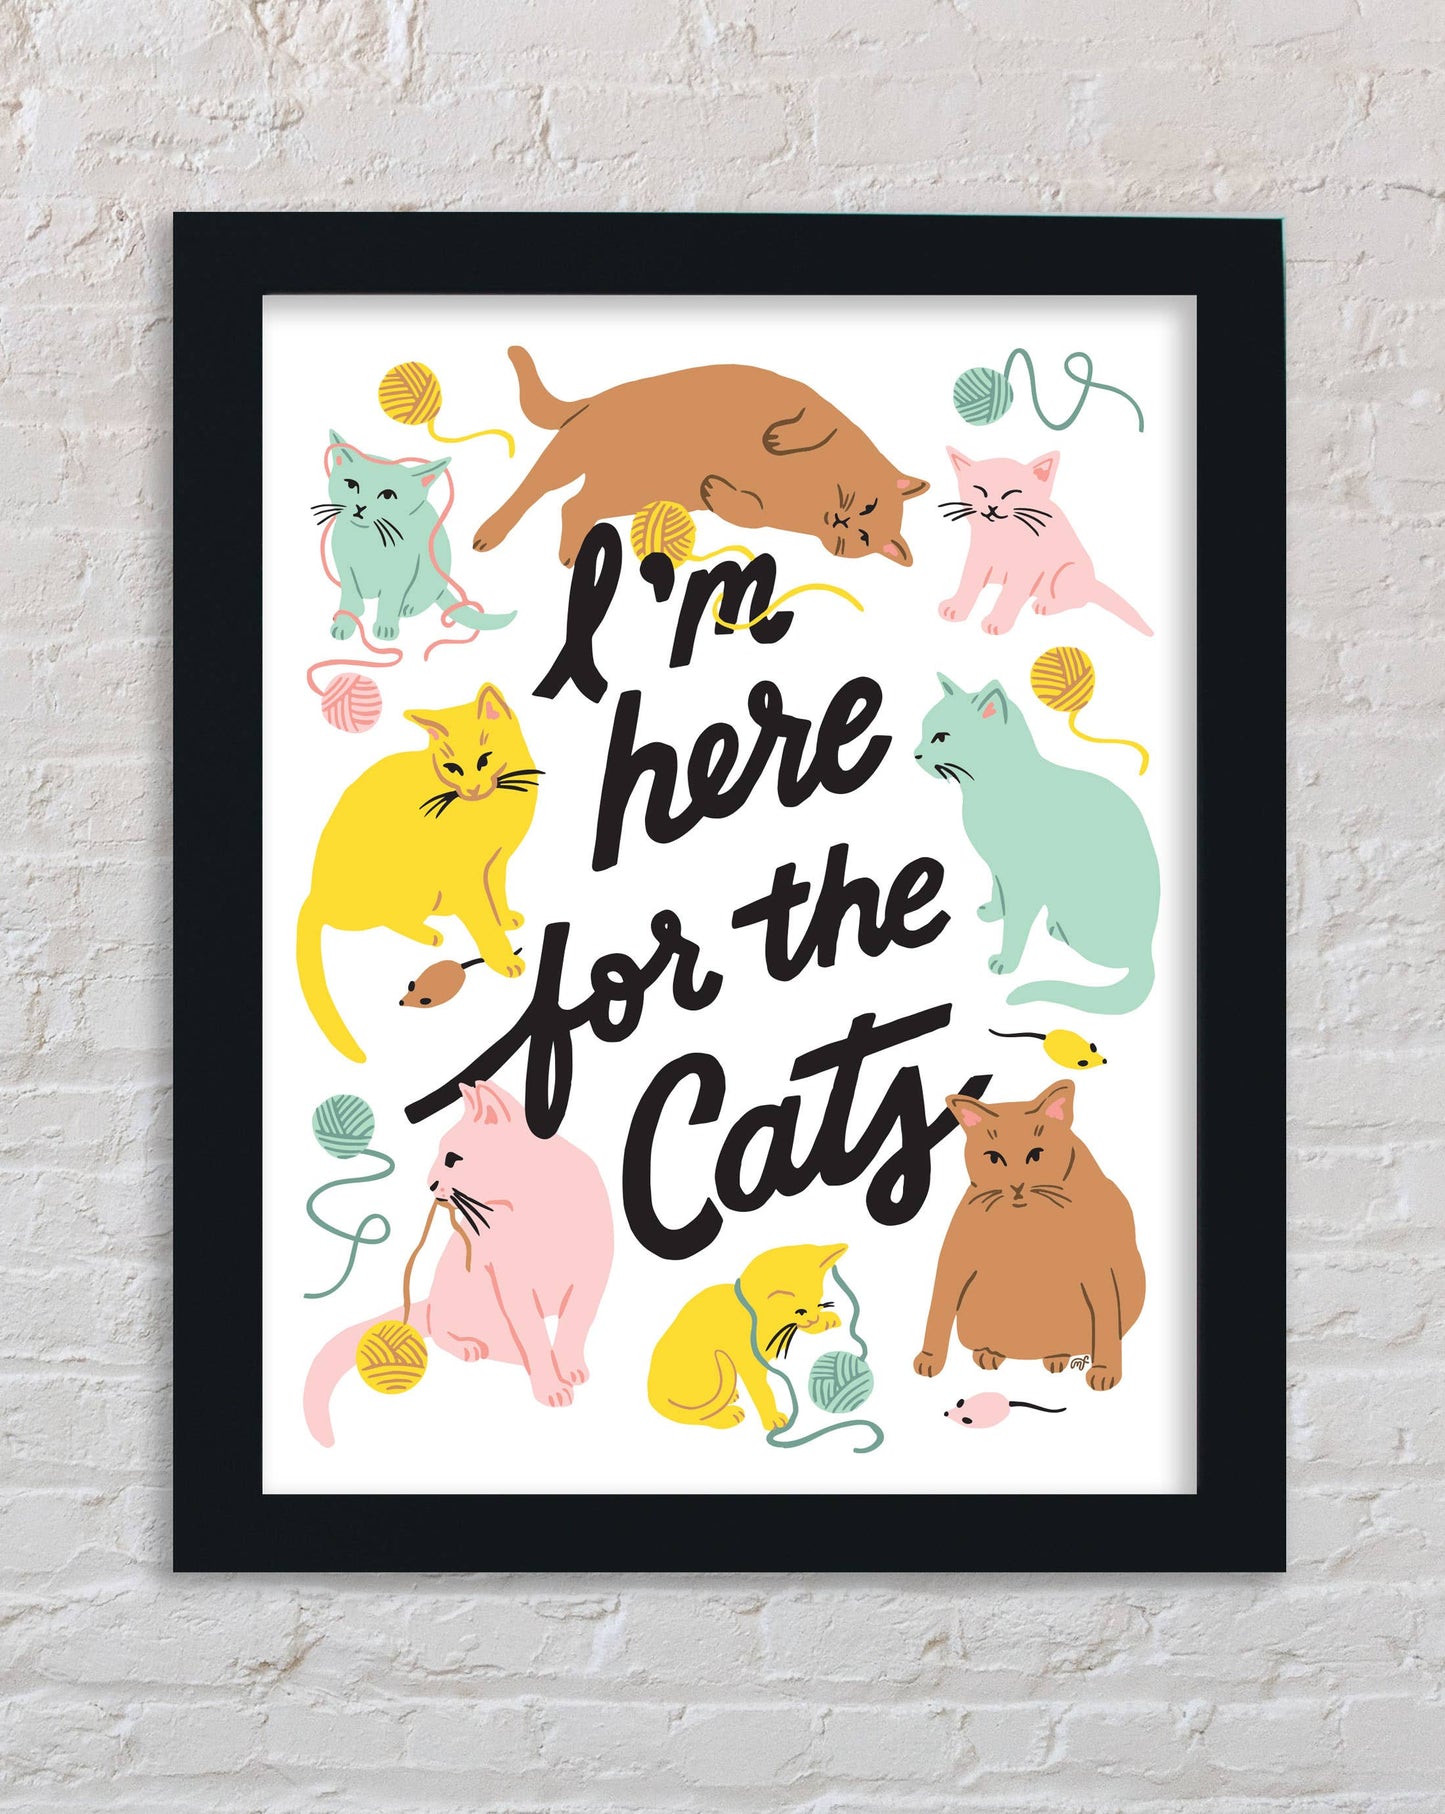 I'm Here for the Cats Rainbow Art Print